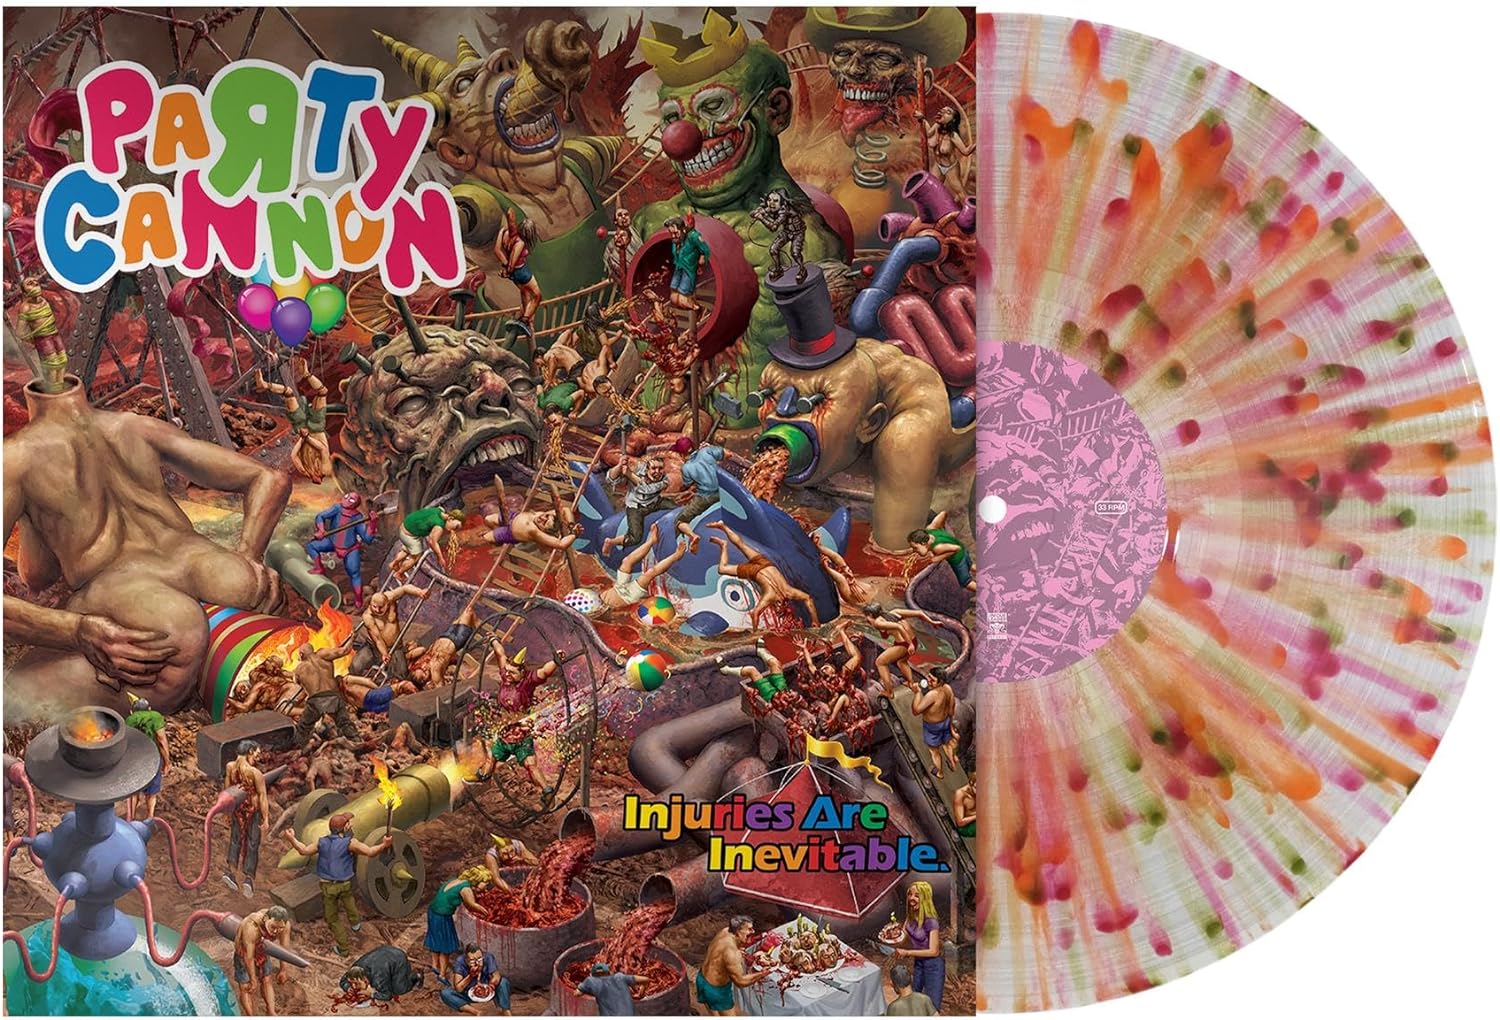 Party Cannon "Injuries Are Inevitable" Splatter Vinyl - PRE-ORDER